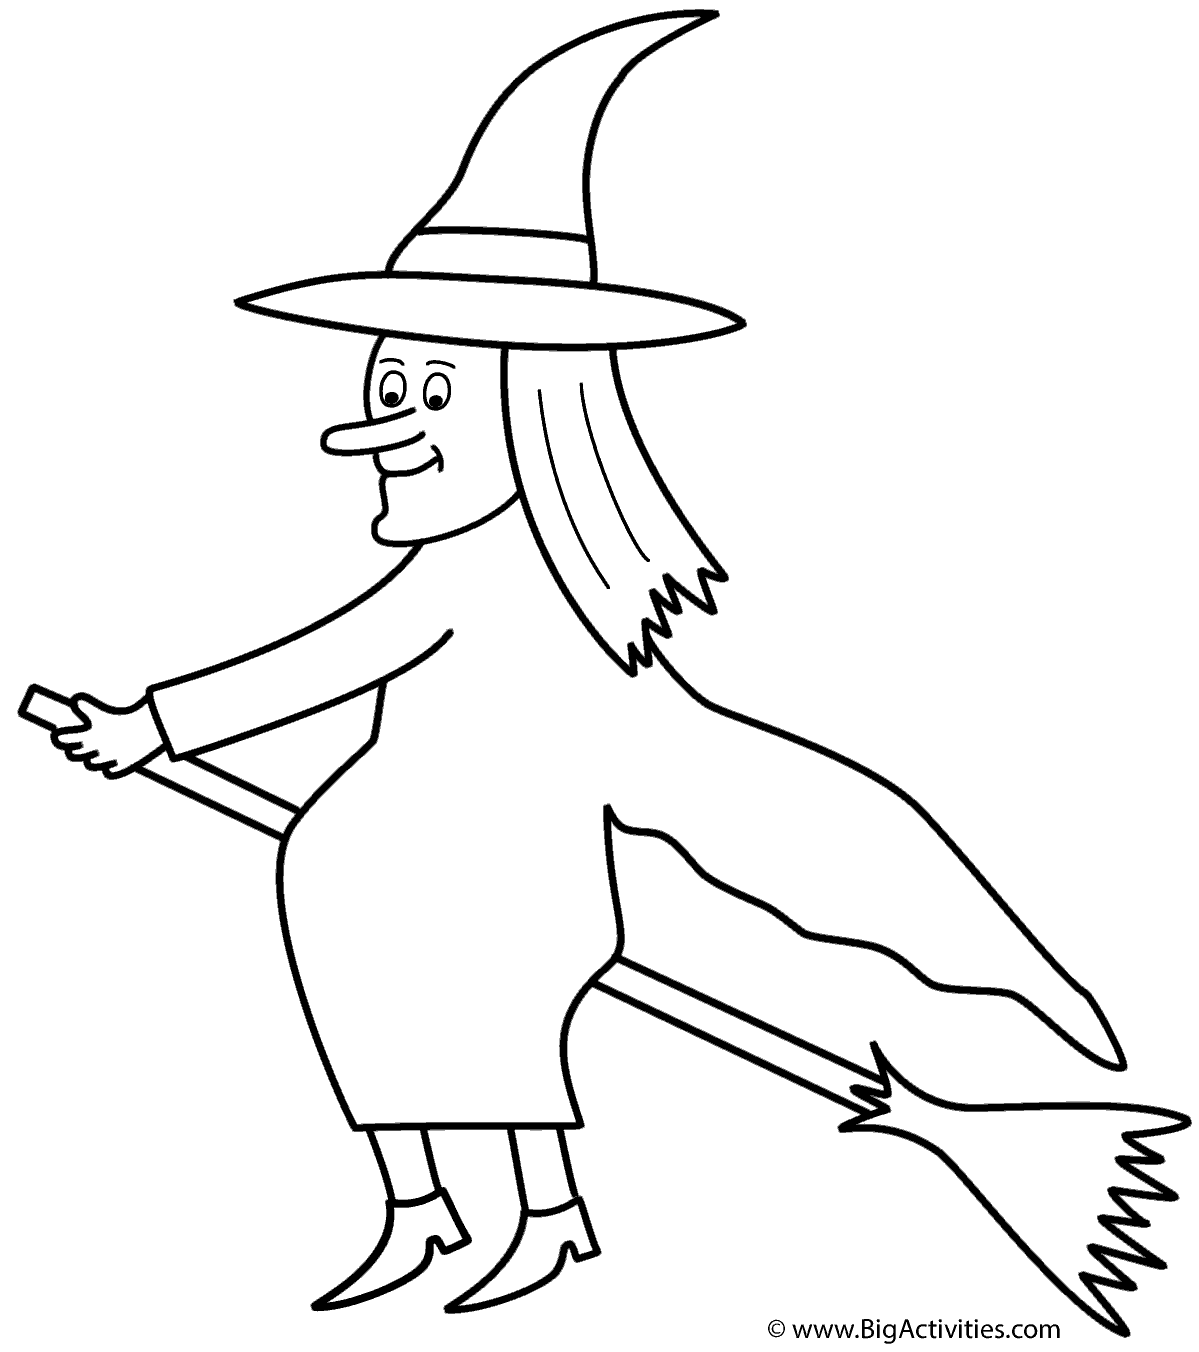 Witch on a broom coloring page great for room on the broom by julia donaldson witch coloring pages halloween coloring halloween coloring pages printable